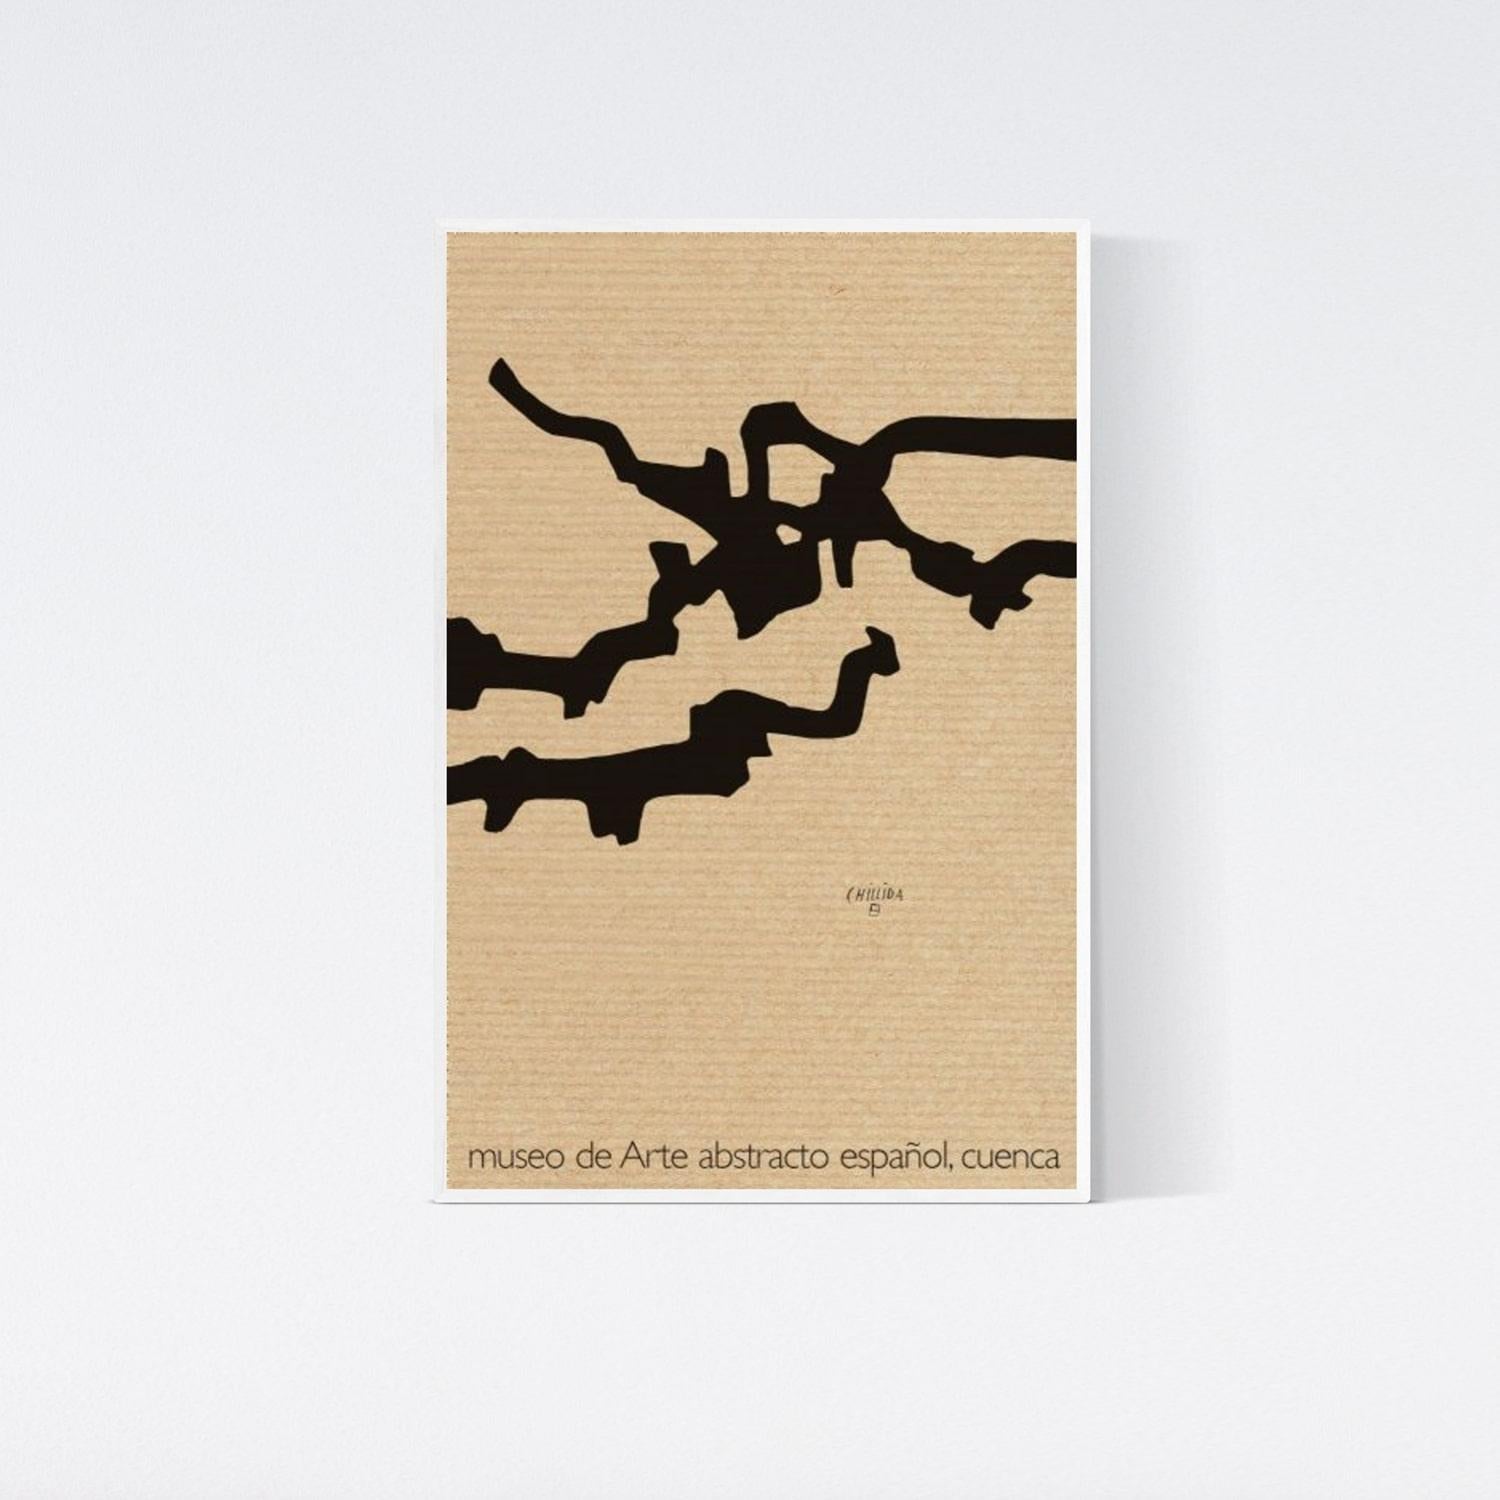 Chillida Exhibition Poster - 3 For Sale on 1stDibs